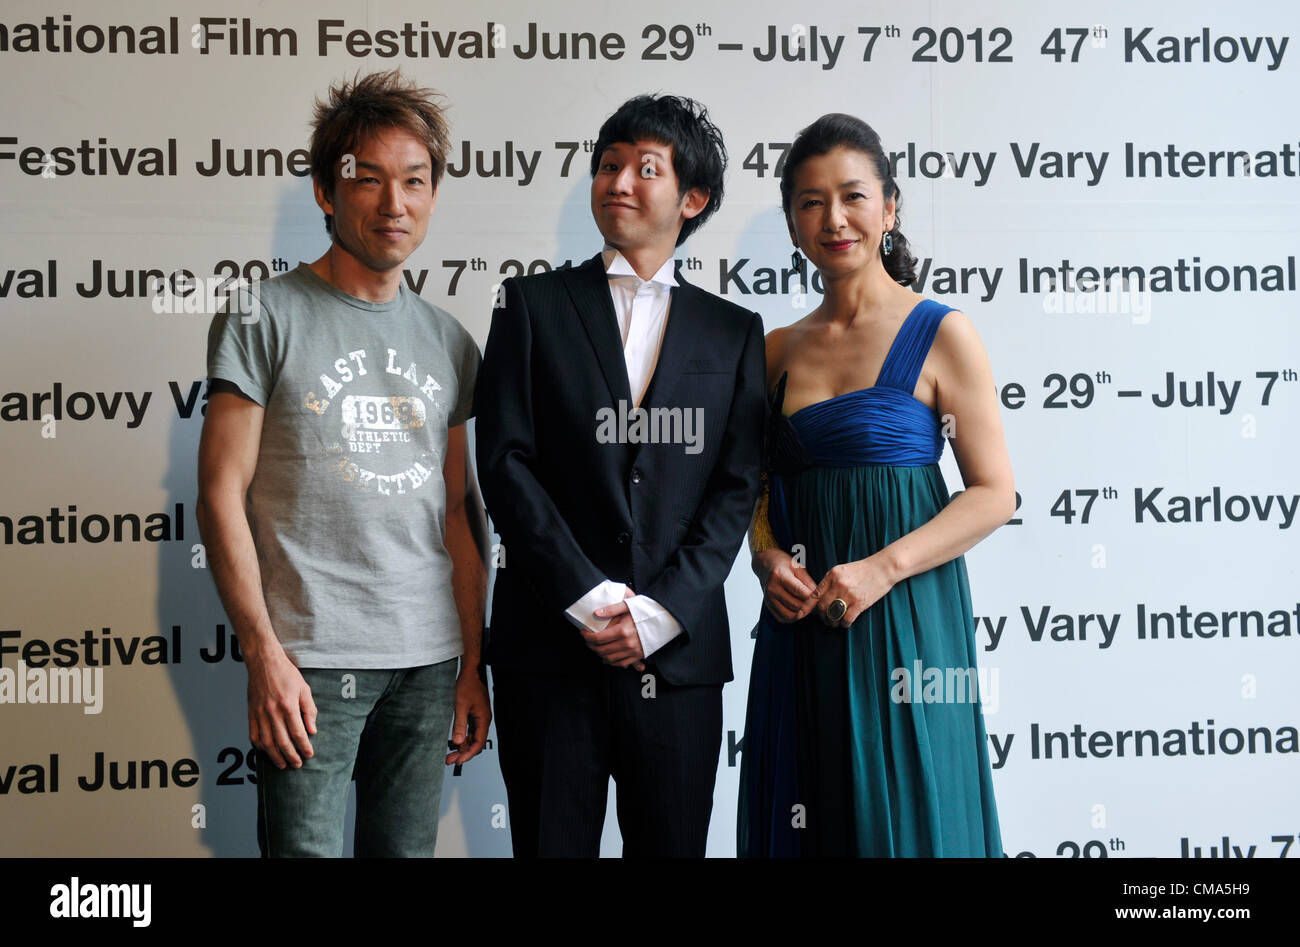 Director Tacuja Jamamoto (left to right) and actors Kento Fukaja and Keiko Takahashi pose before the screening of the film Kamihate Store during the 47th International Film Festival in Karlovy Vary, Czech Republic, on Monday, July 2nd, 2012. (CTK Photo/Vit Simanek) Stock Photo